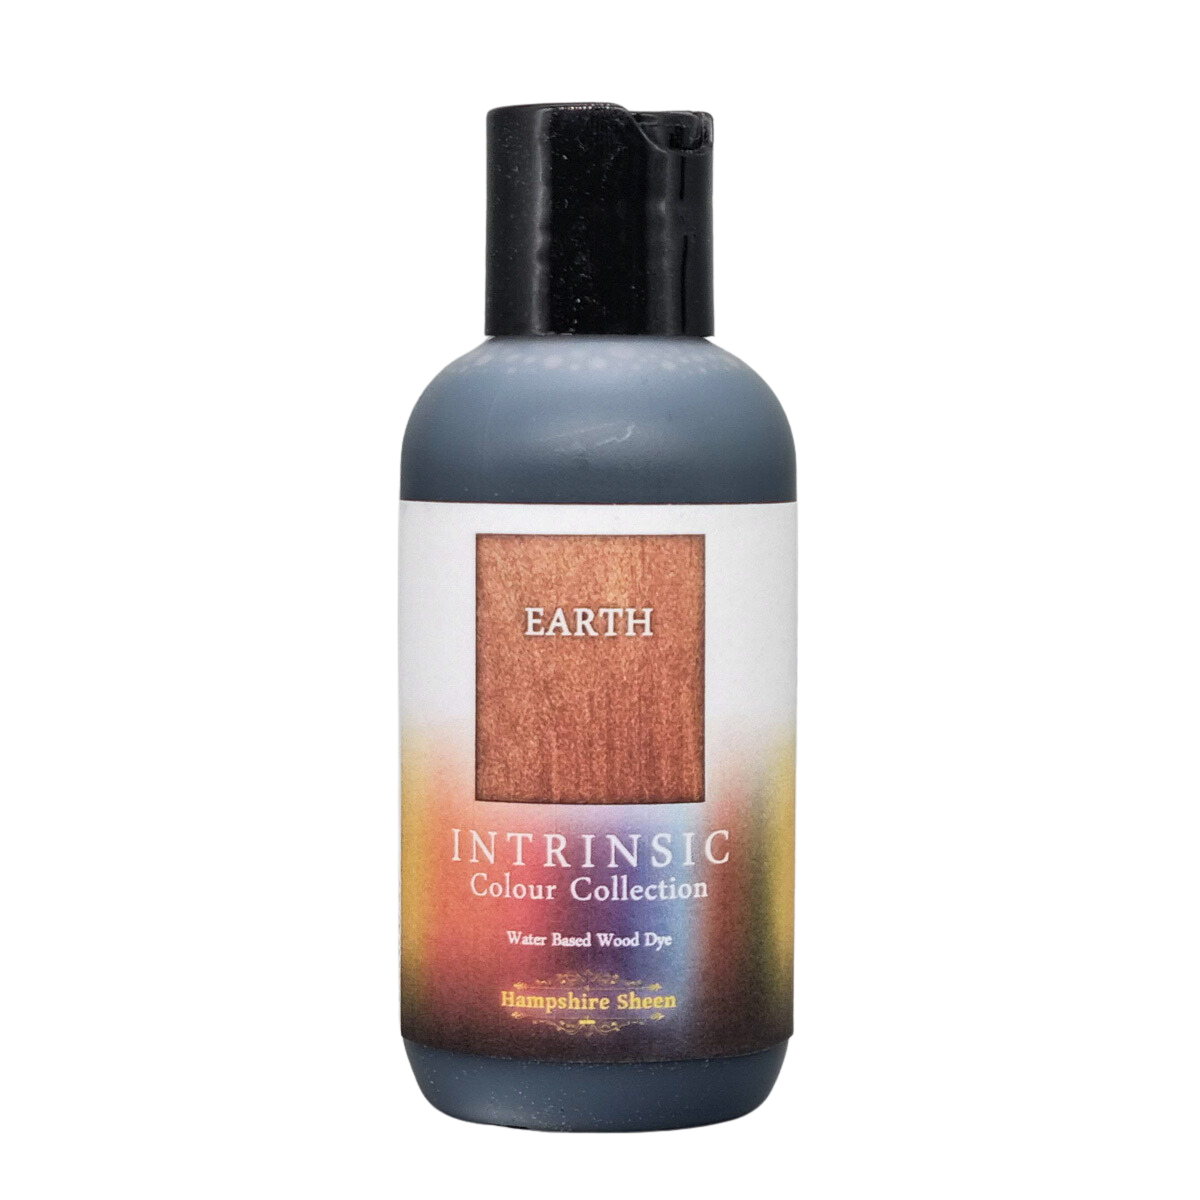 Earth - Intrinsic Colours 125ml - Hampshire Sheen